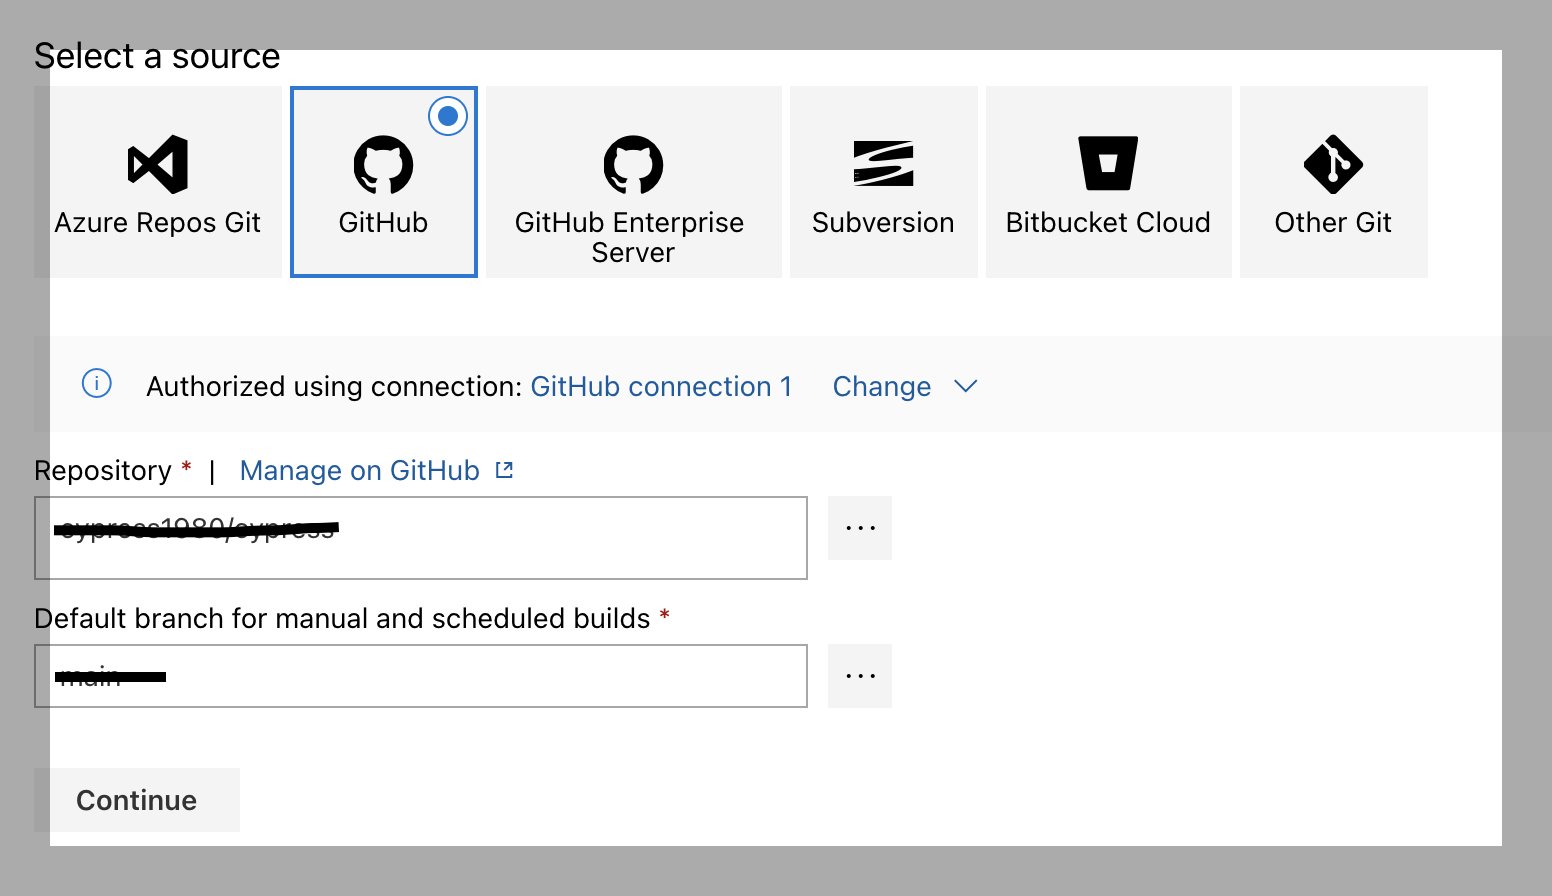 Select the repository and branch name from the existing repository.